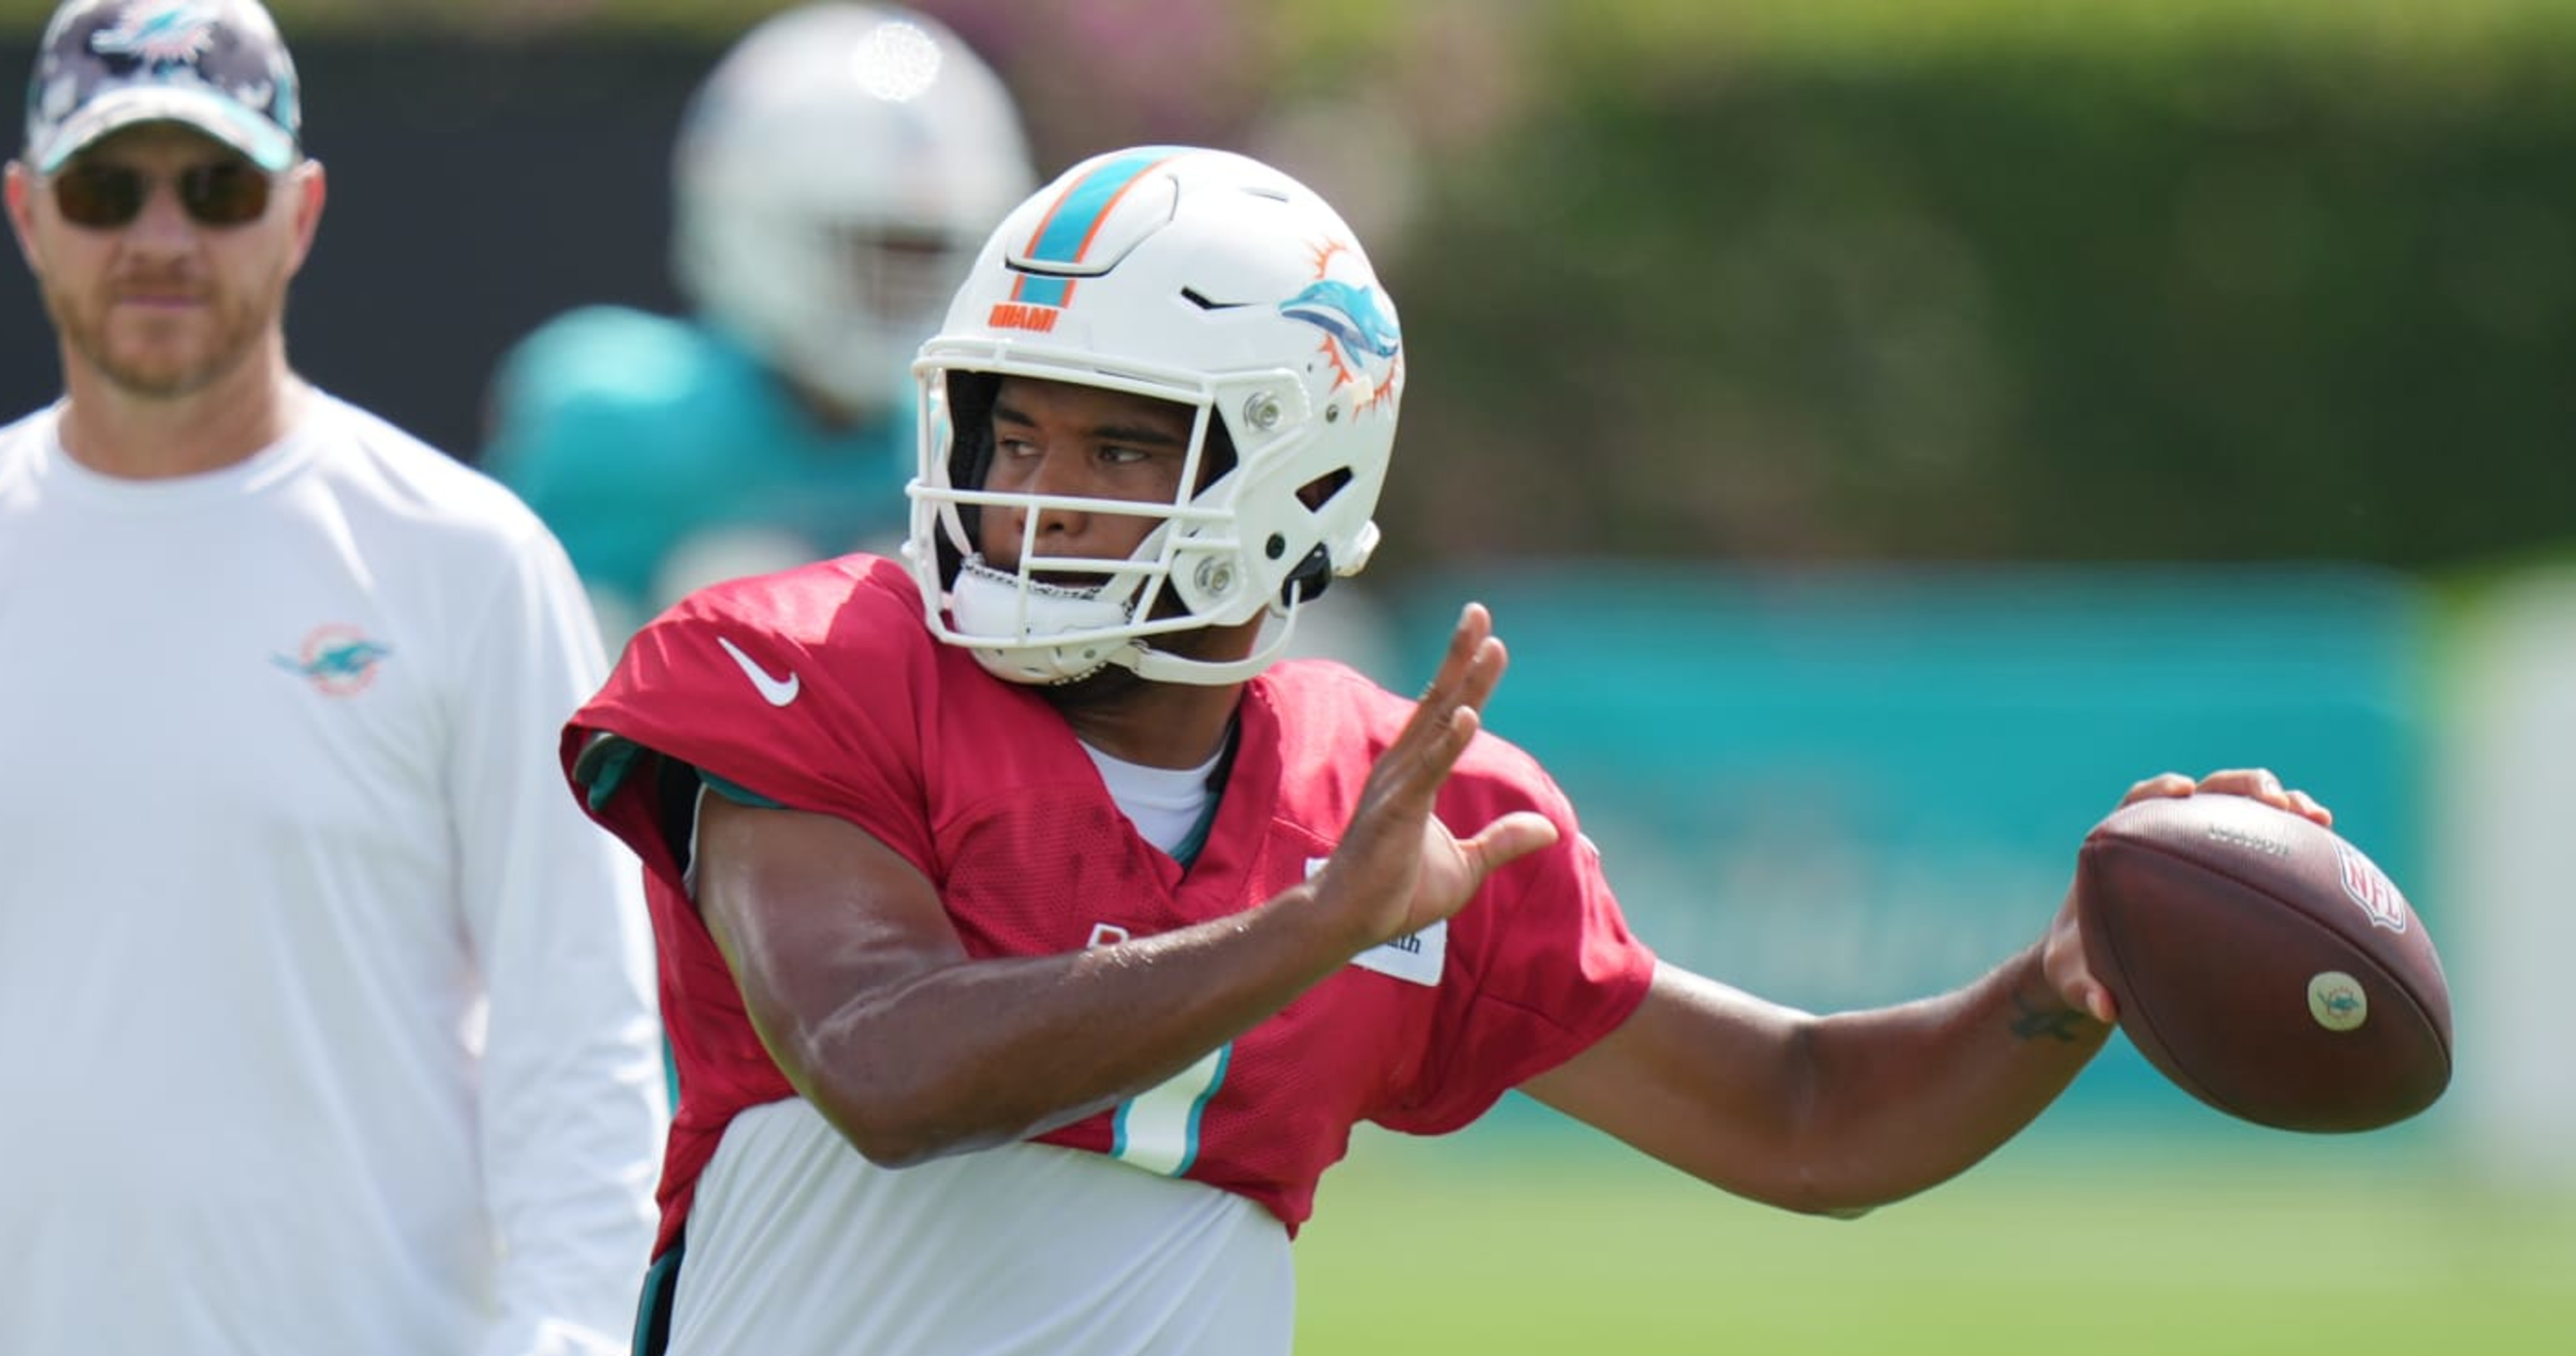 Video: A look at the Miami Dolphins throwback jerseys from all angles